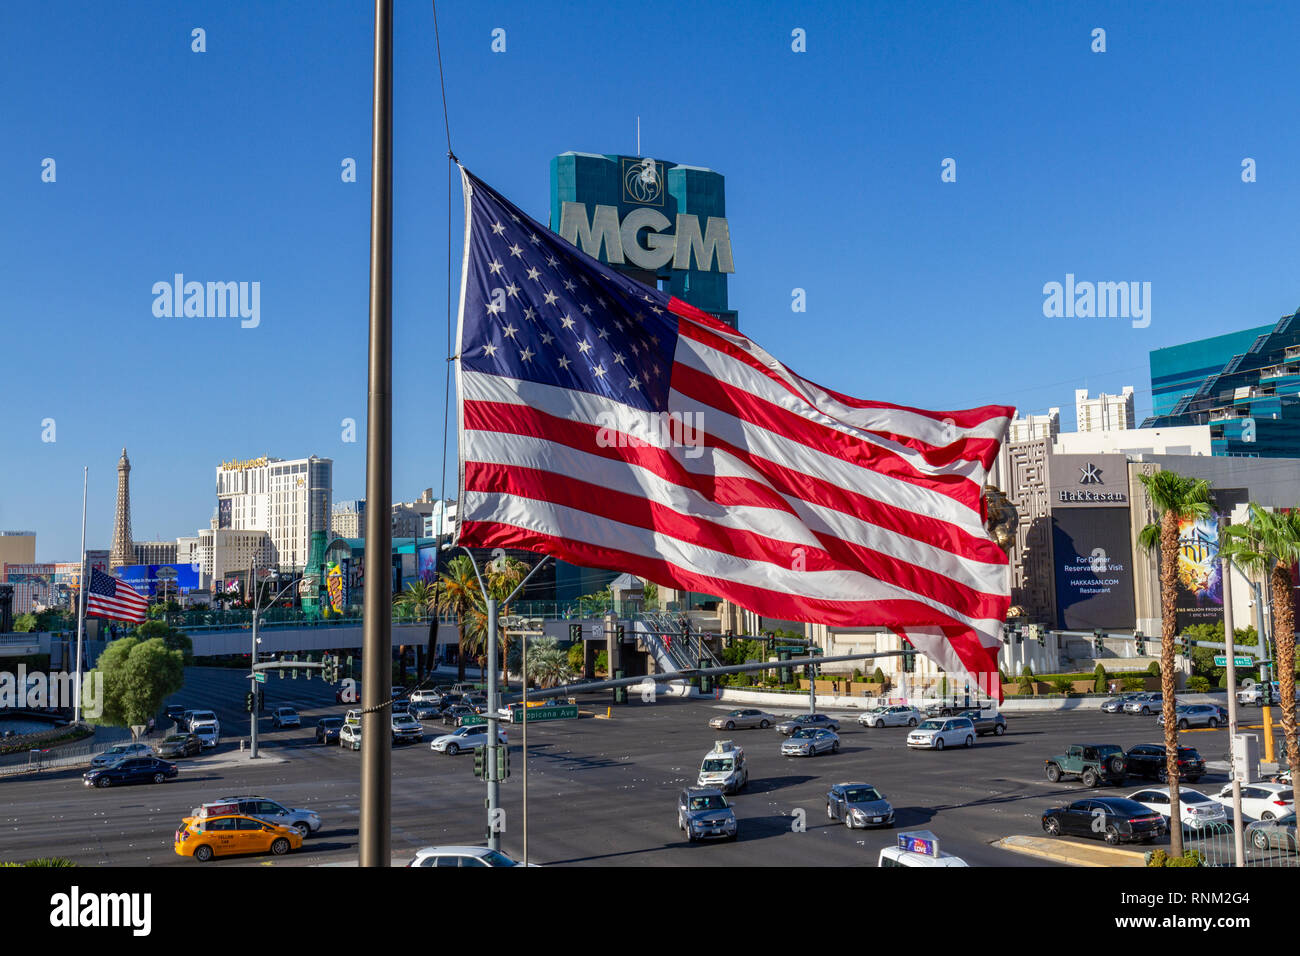 America flag with the MGM Grand Hotel, Las Vegas on The Strip in Las Vegas, Nevada, United States. Stock Photo